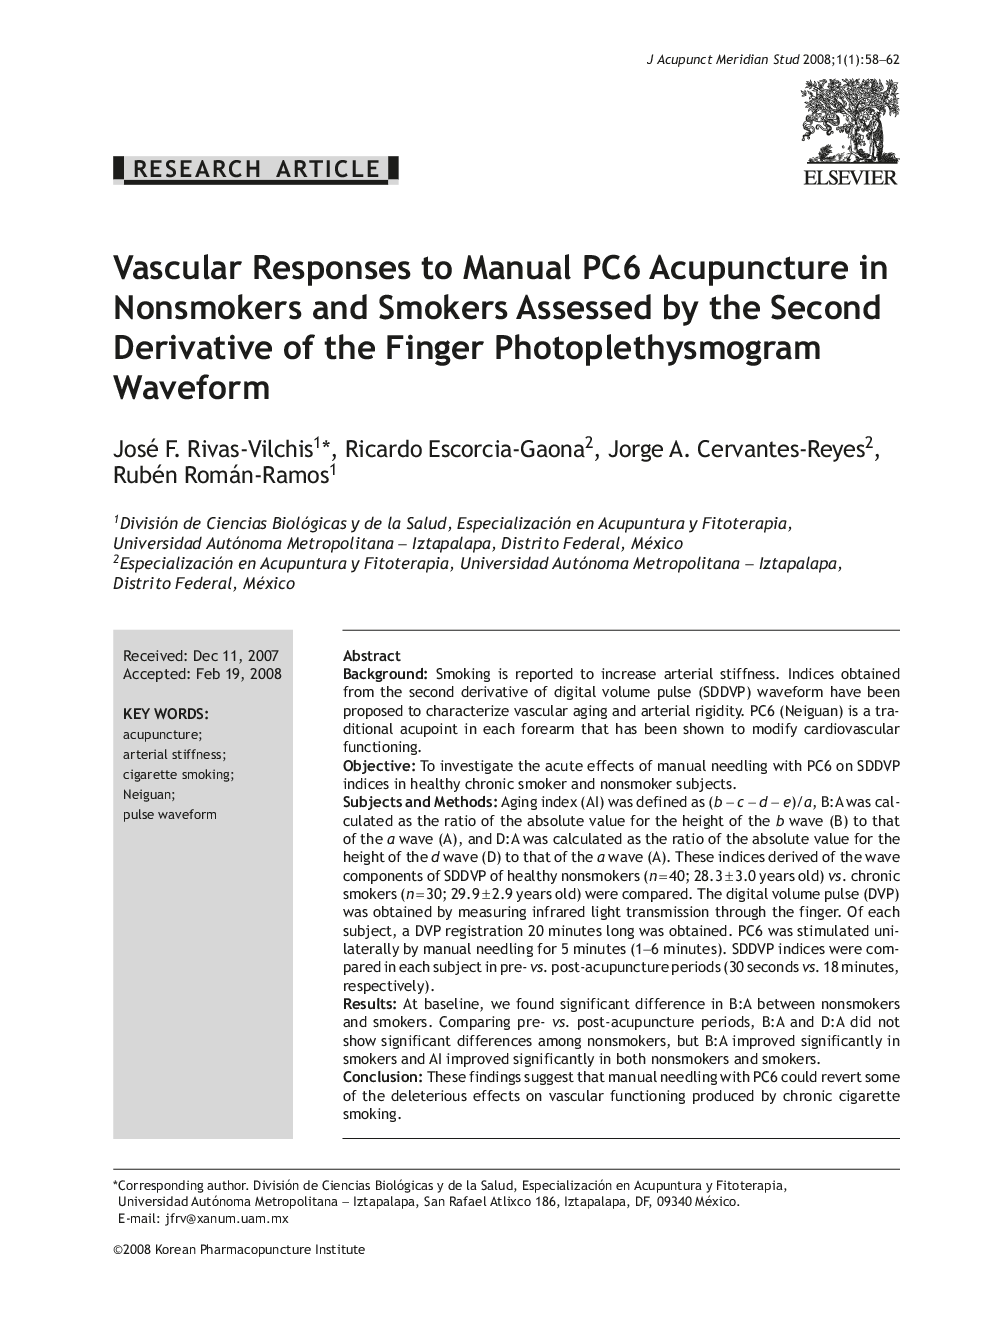 Vascular Responses to Manual PC6 Acupuncture in Nonsmokers and Smokers Assessed by the Second Derivative of the Finger Photoplethysmogram Waveform